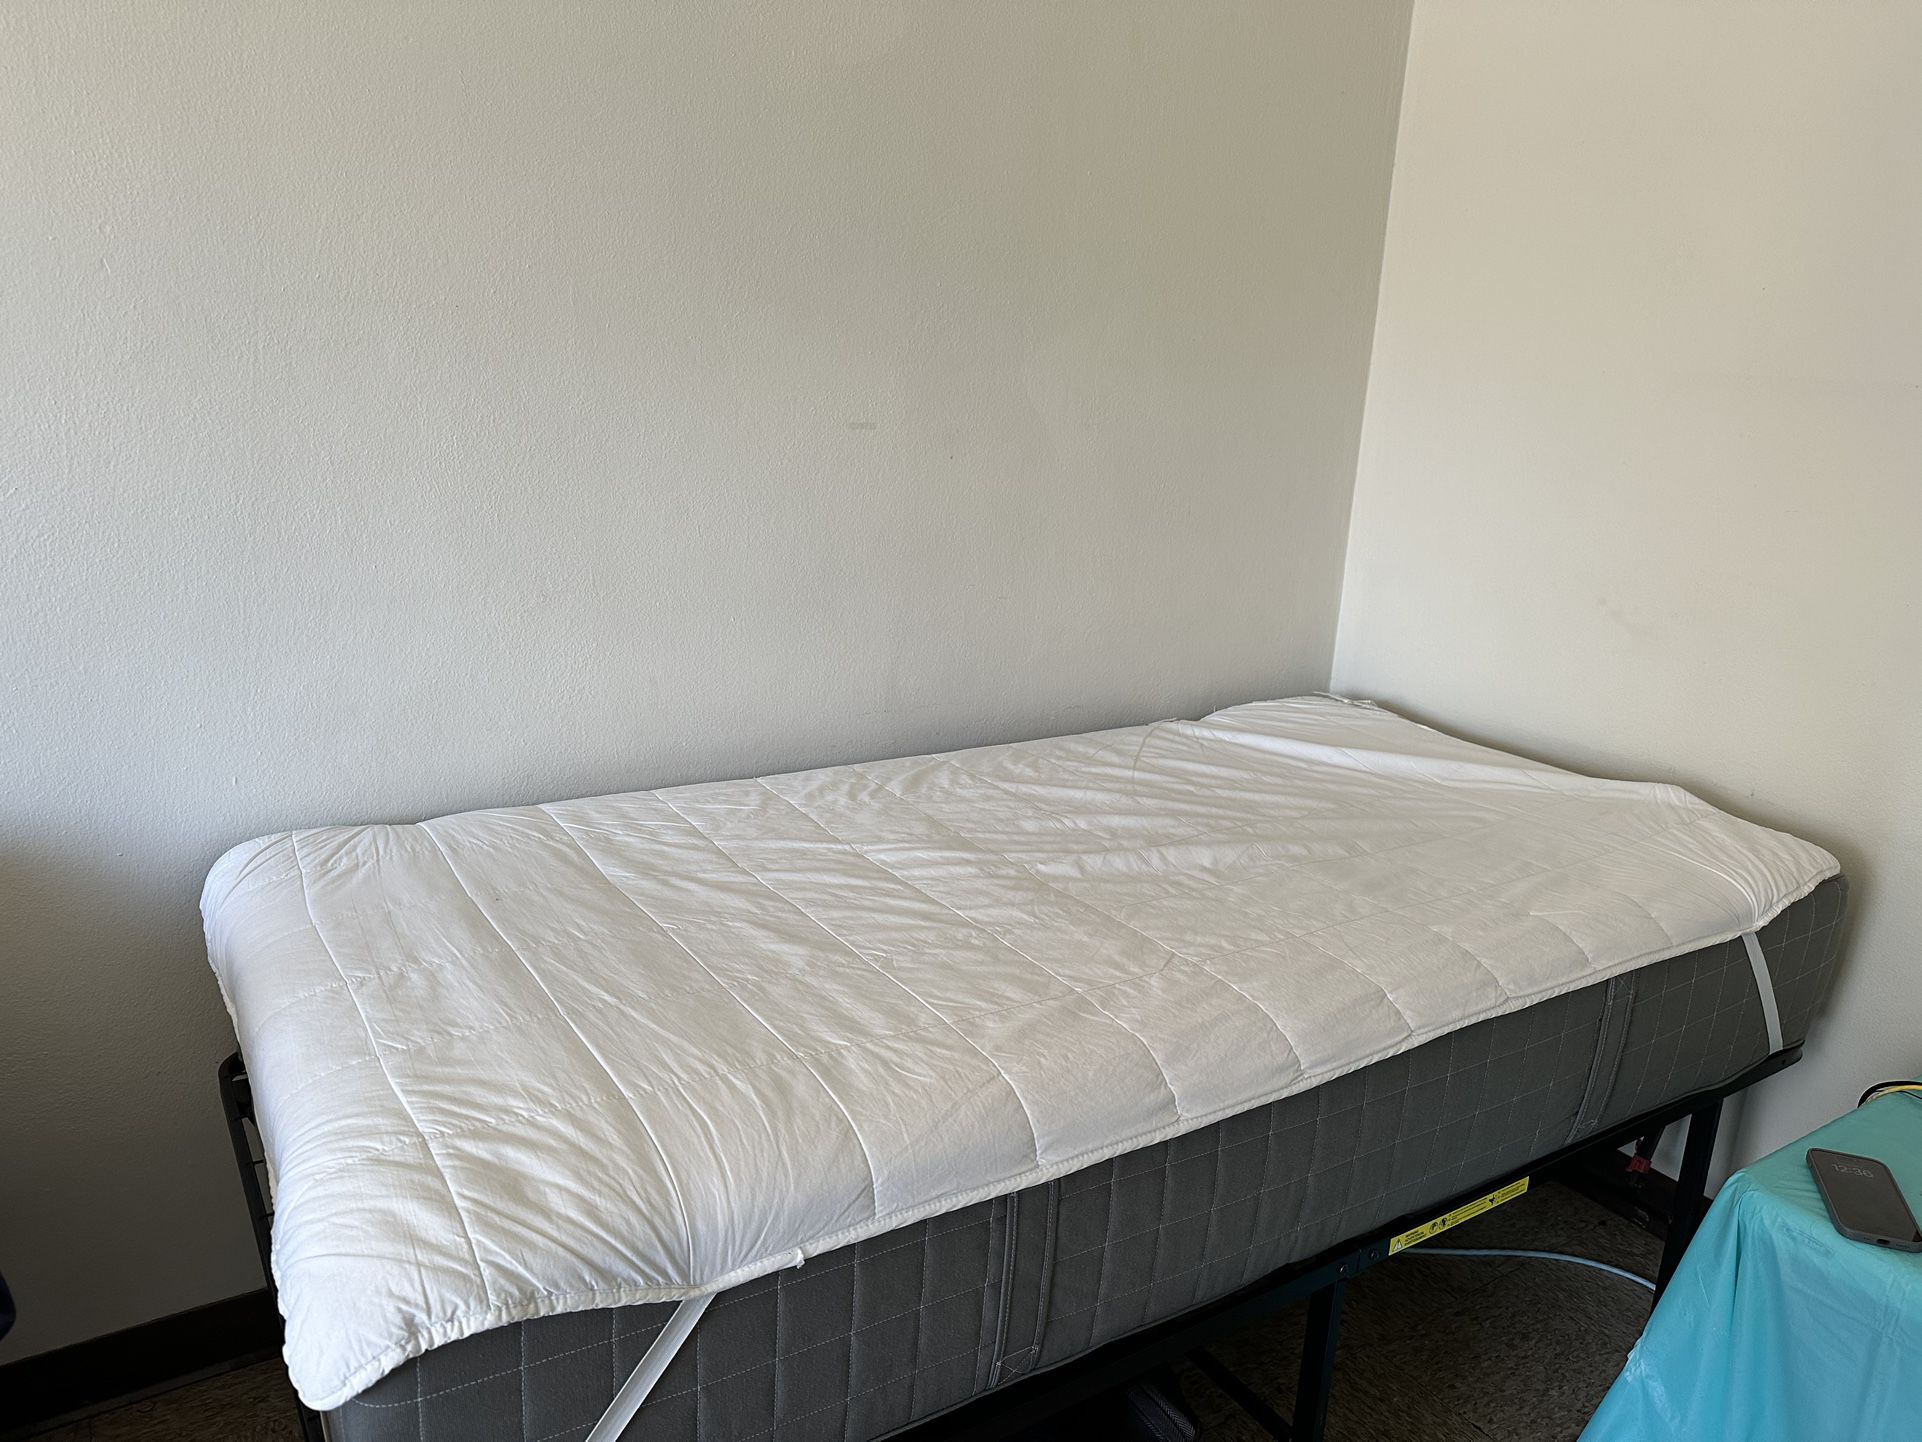 Bed mattress with protector and bed frame 